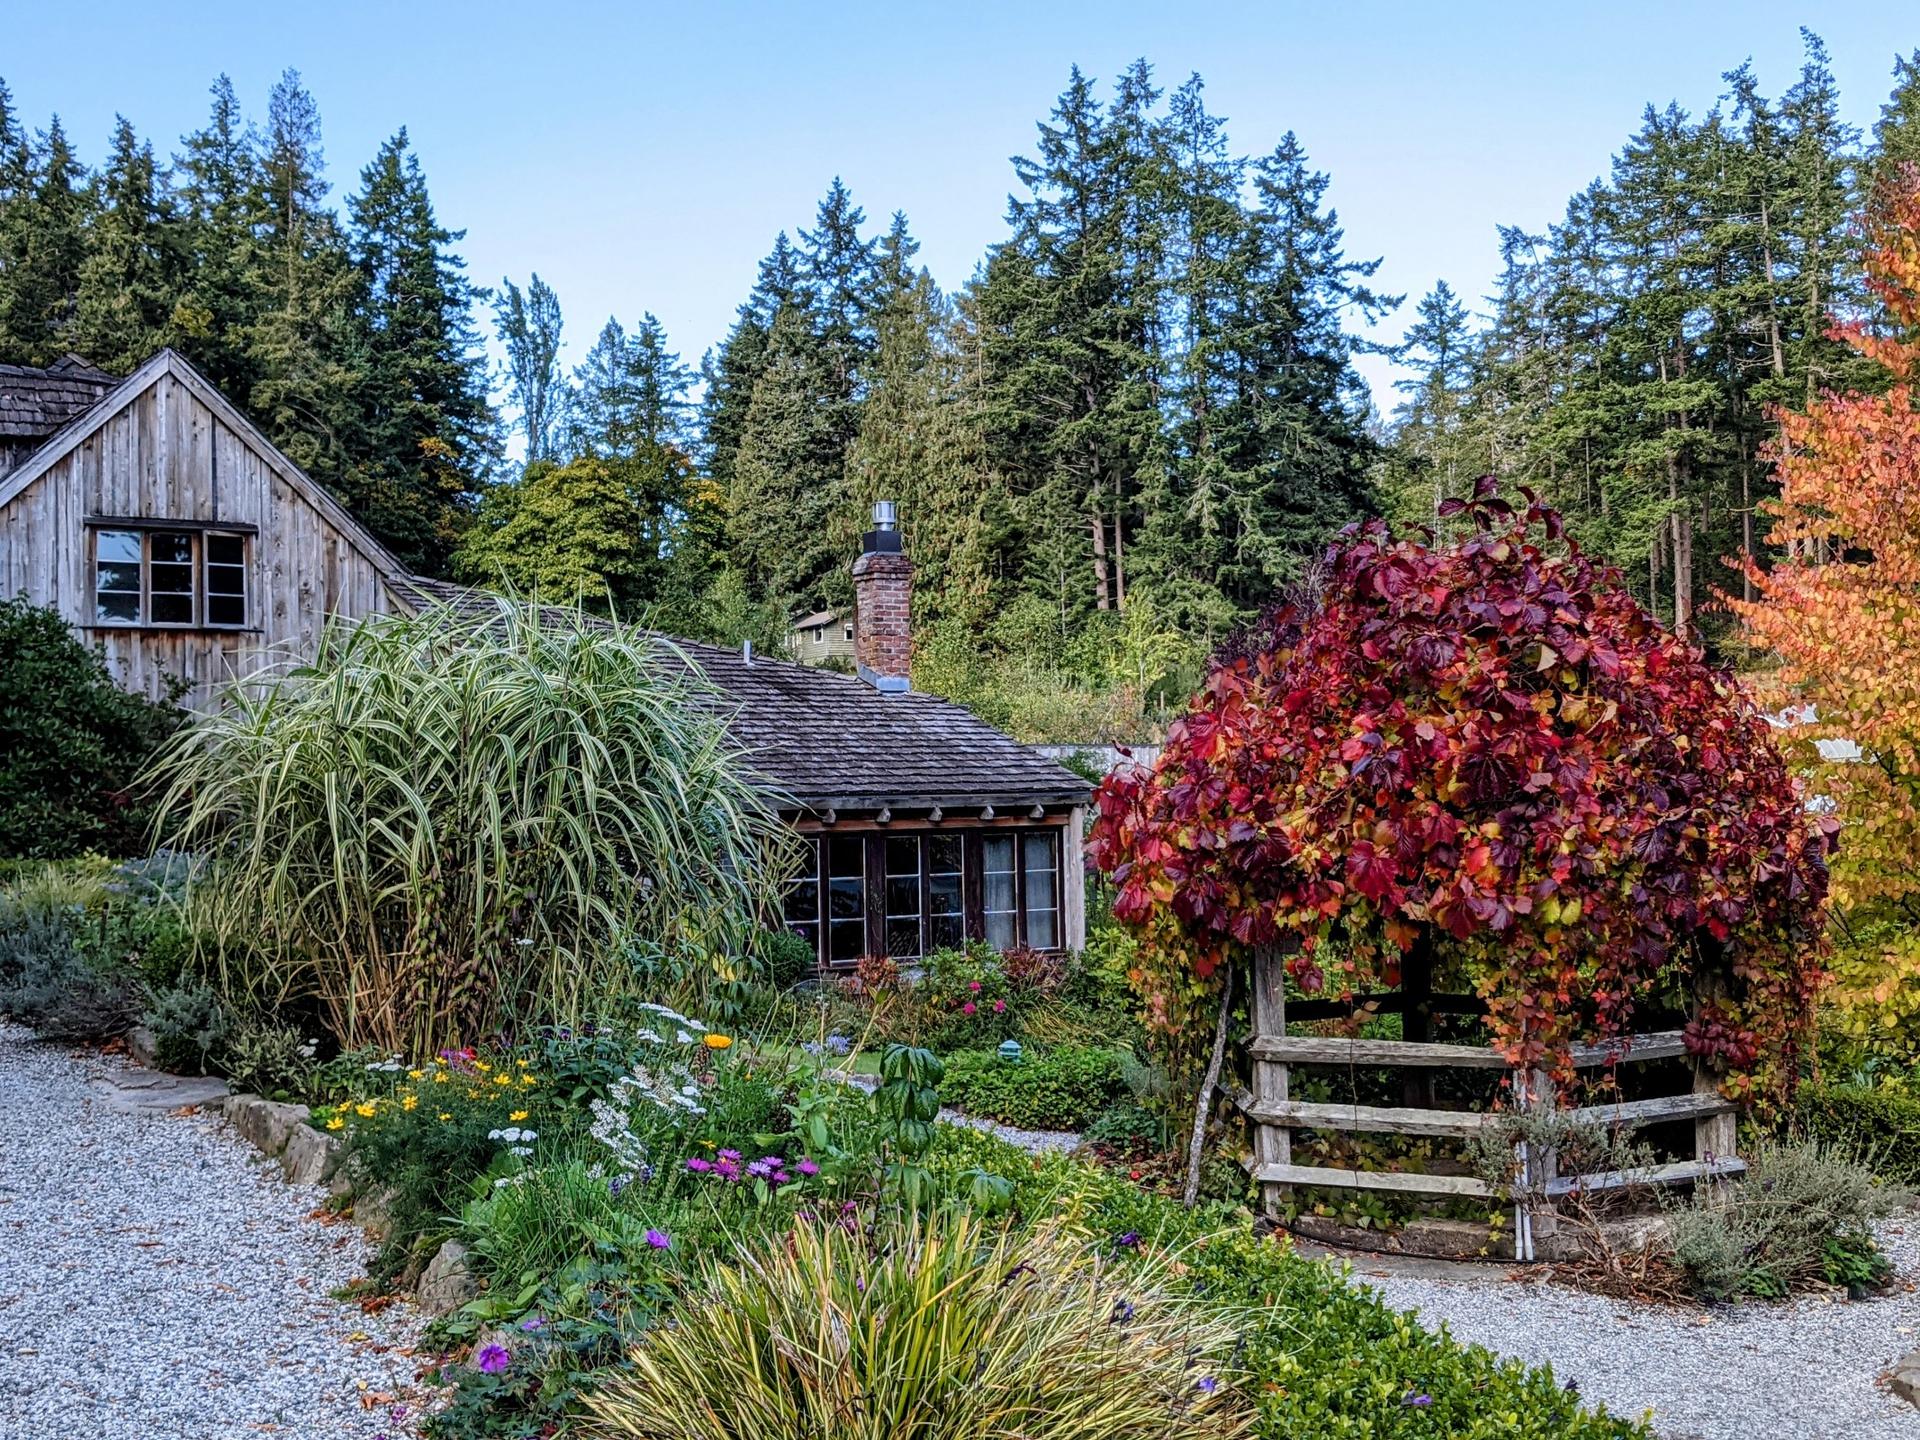 Hastings House is set on 22 acres of oceanfront property in beautiful Salt Spring Island.